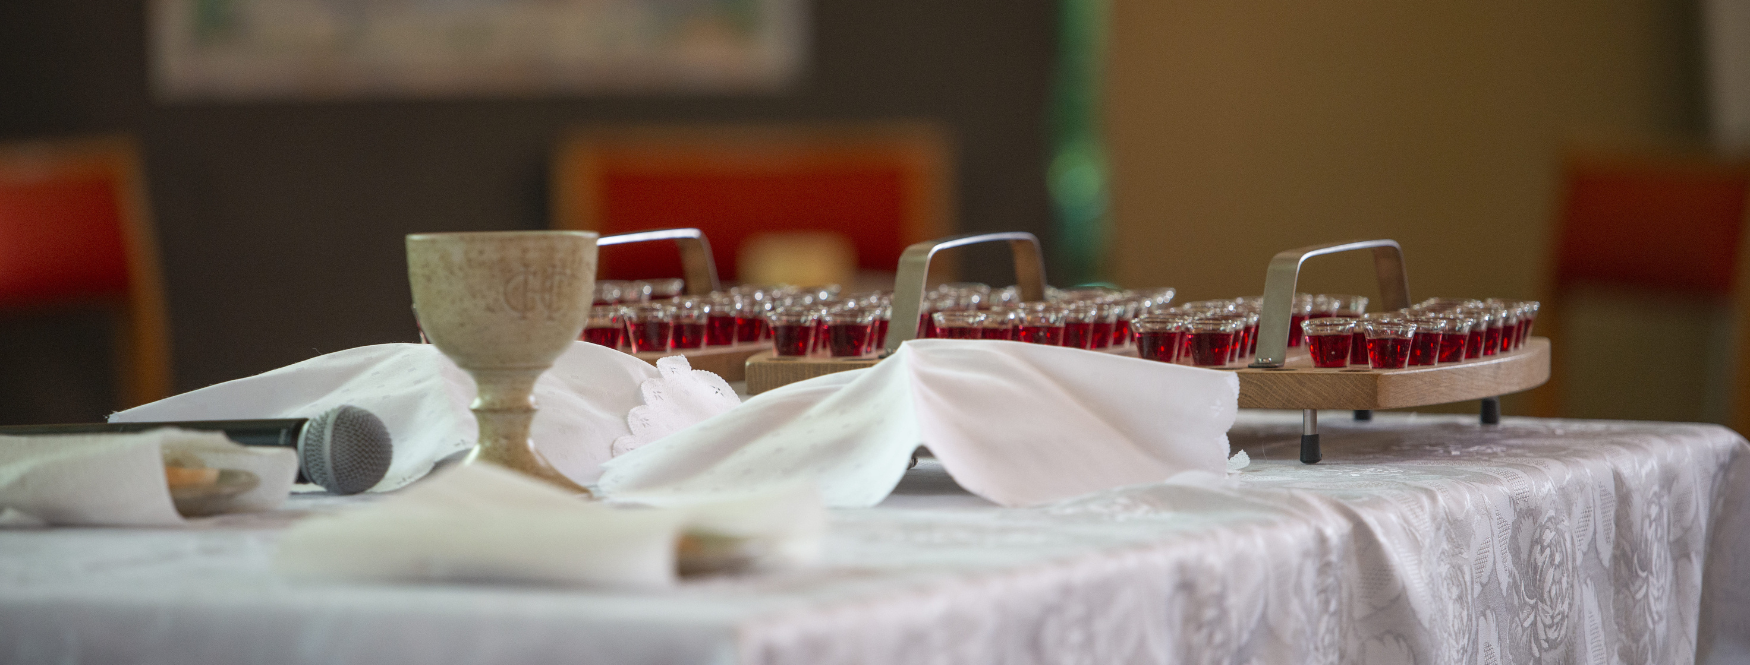 Close up photo of the communion table